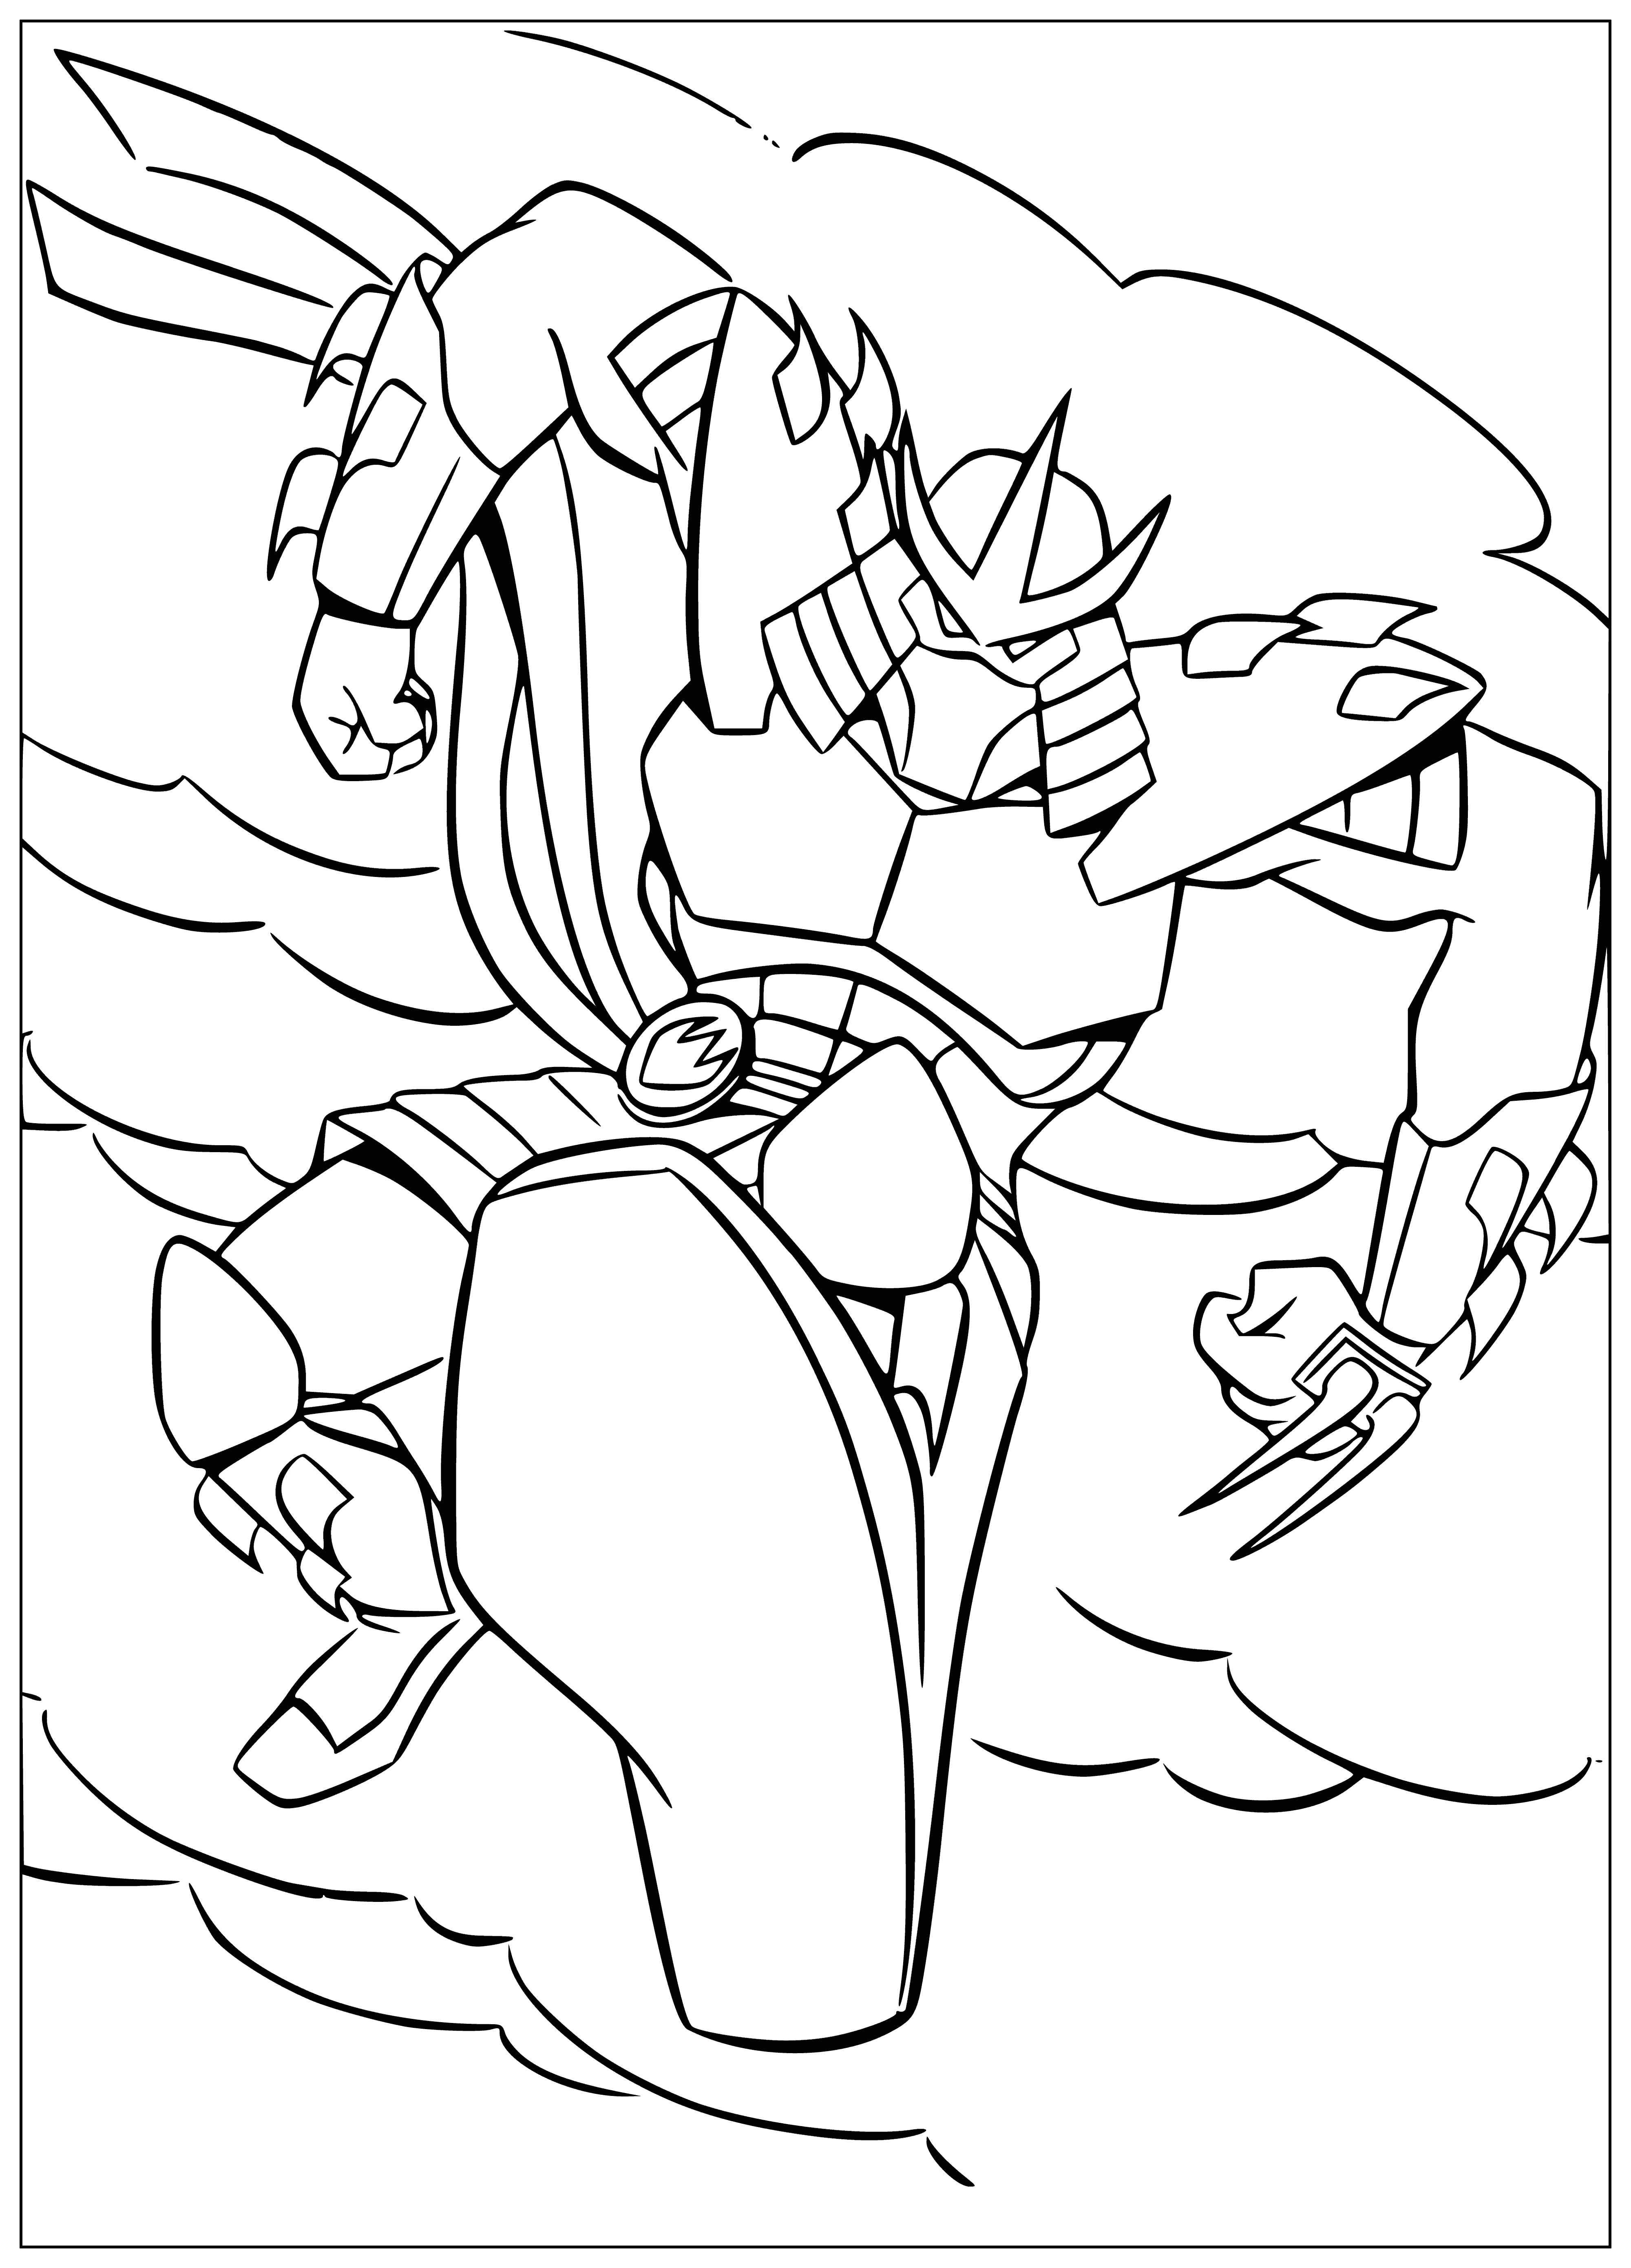 Schroeder coloring page